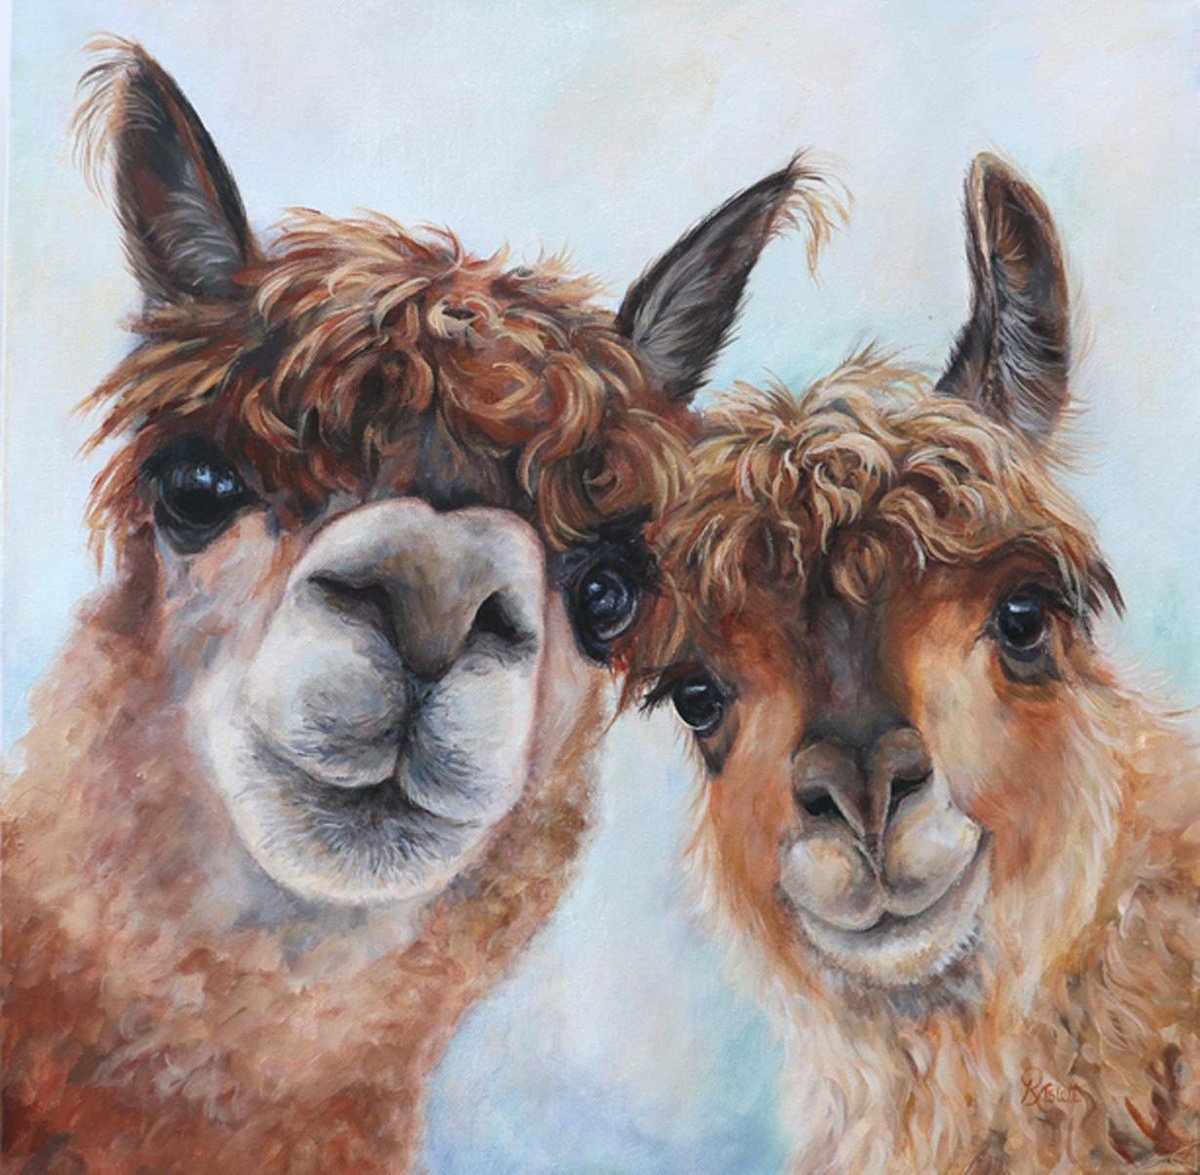 Me and My Bestie by Ruth Aslett